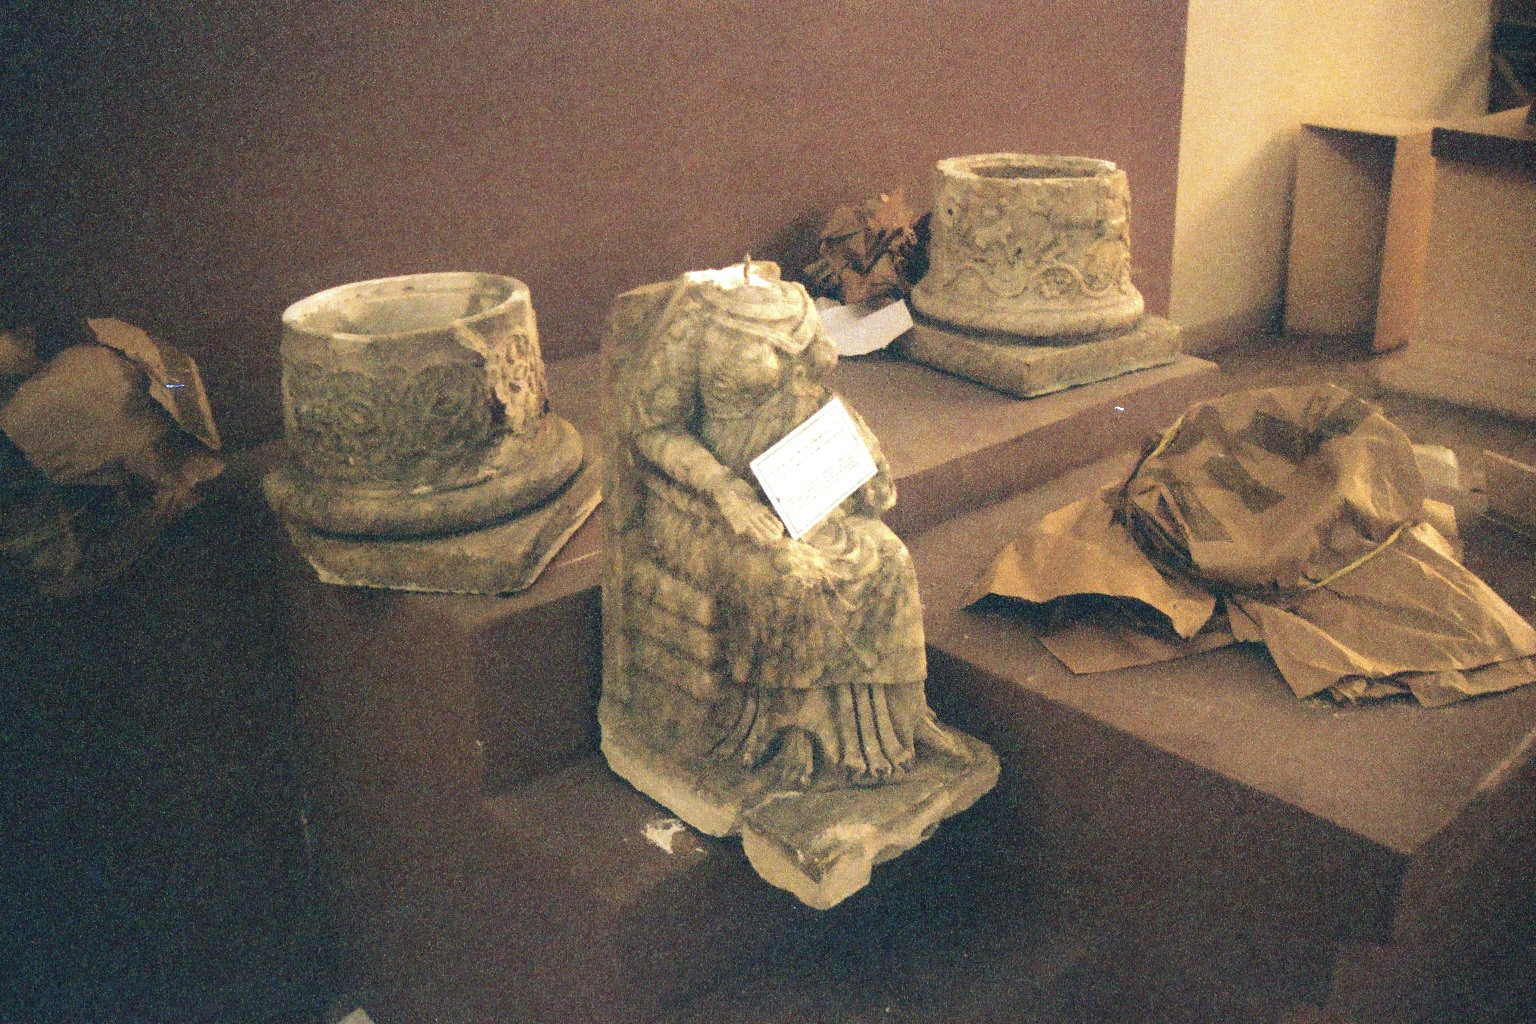 Damaged sculptures in the Iraq Museum, 2013